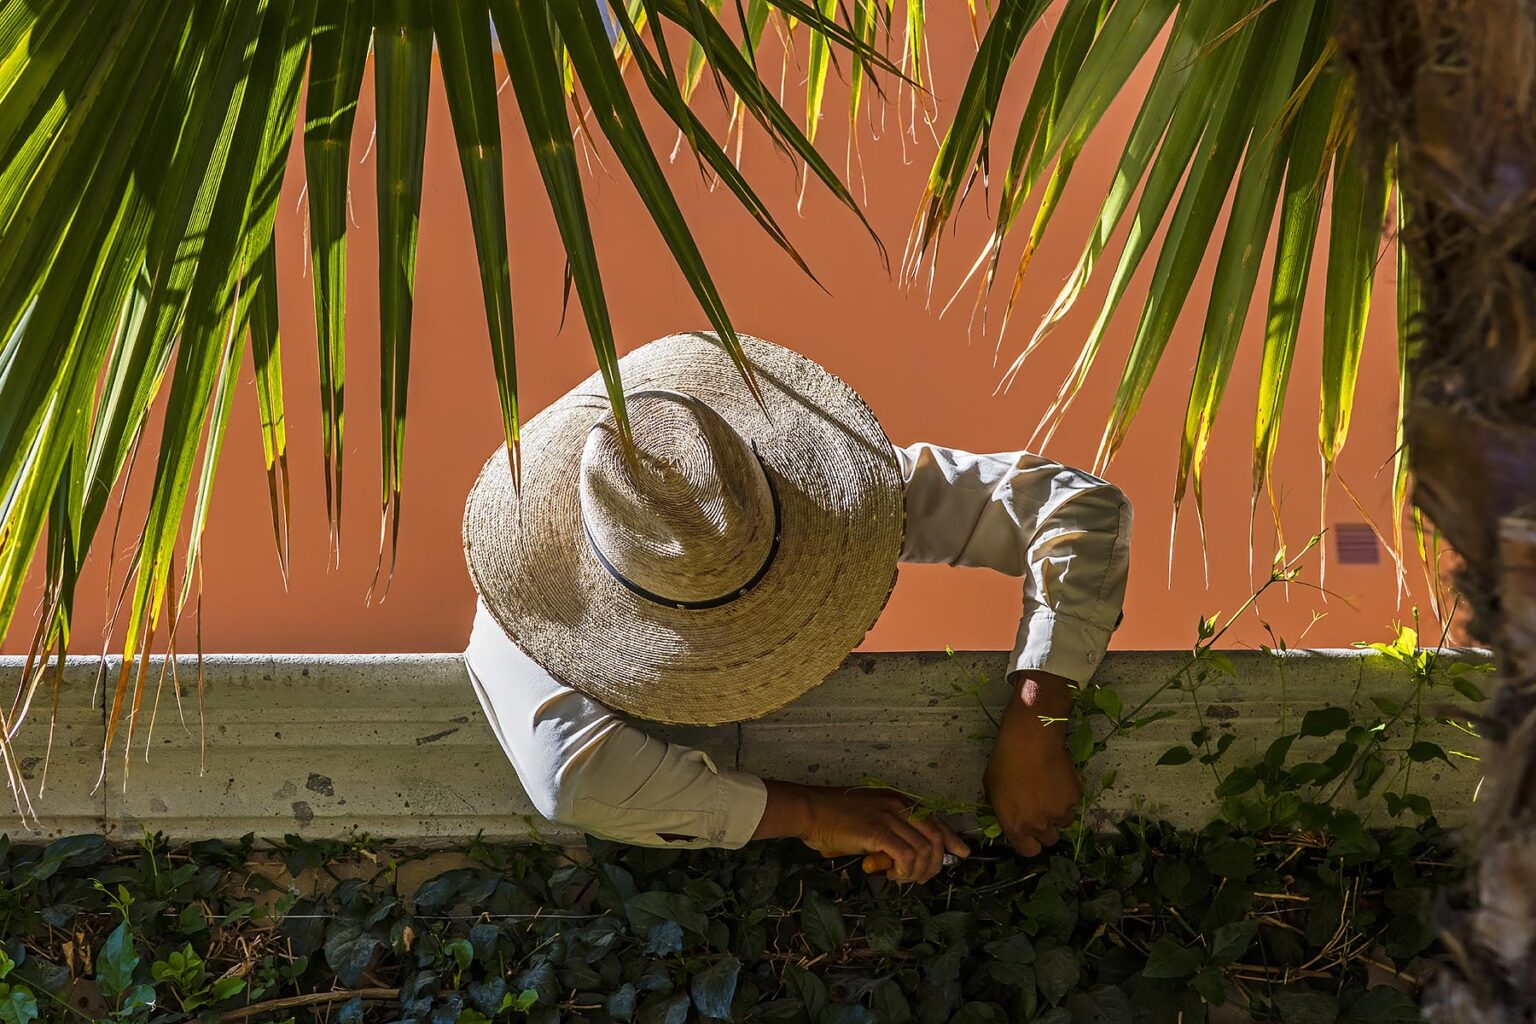 A gardener at work at the ROSEWOOD HOTEL - SAN MIGUEL DE ALLENDE, MEXICO